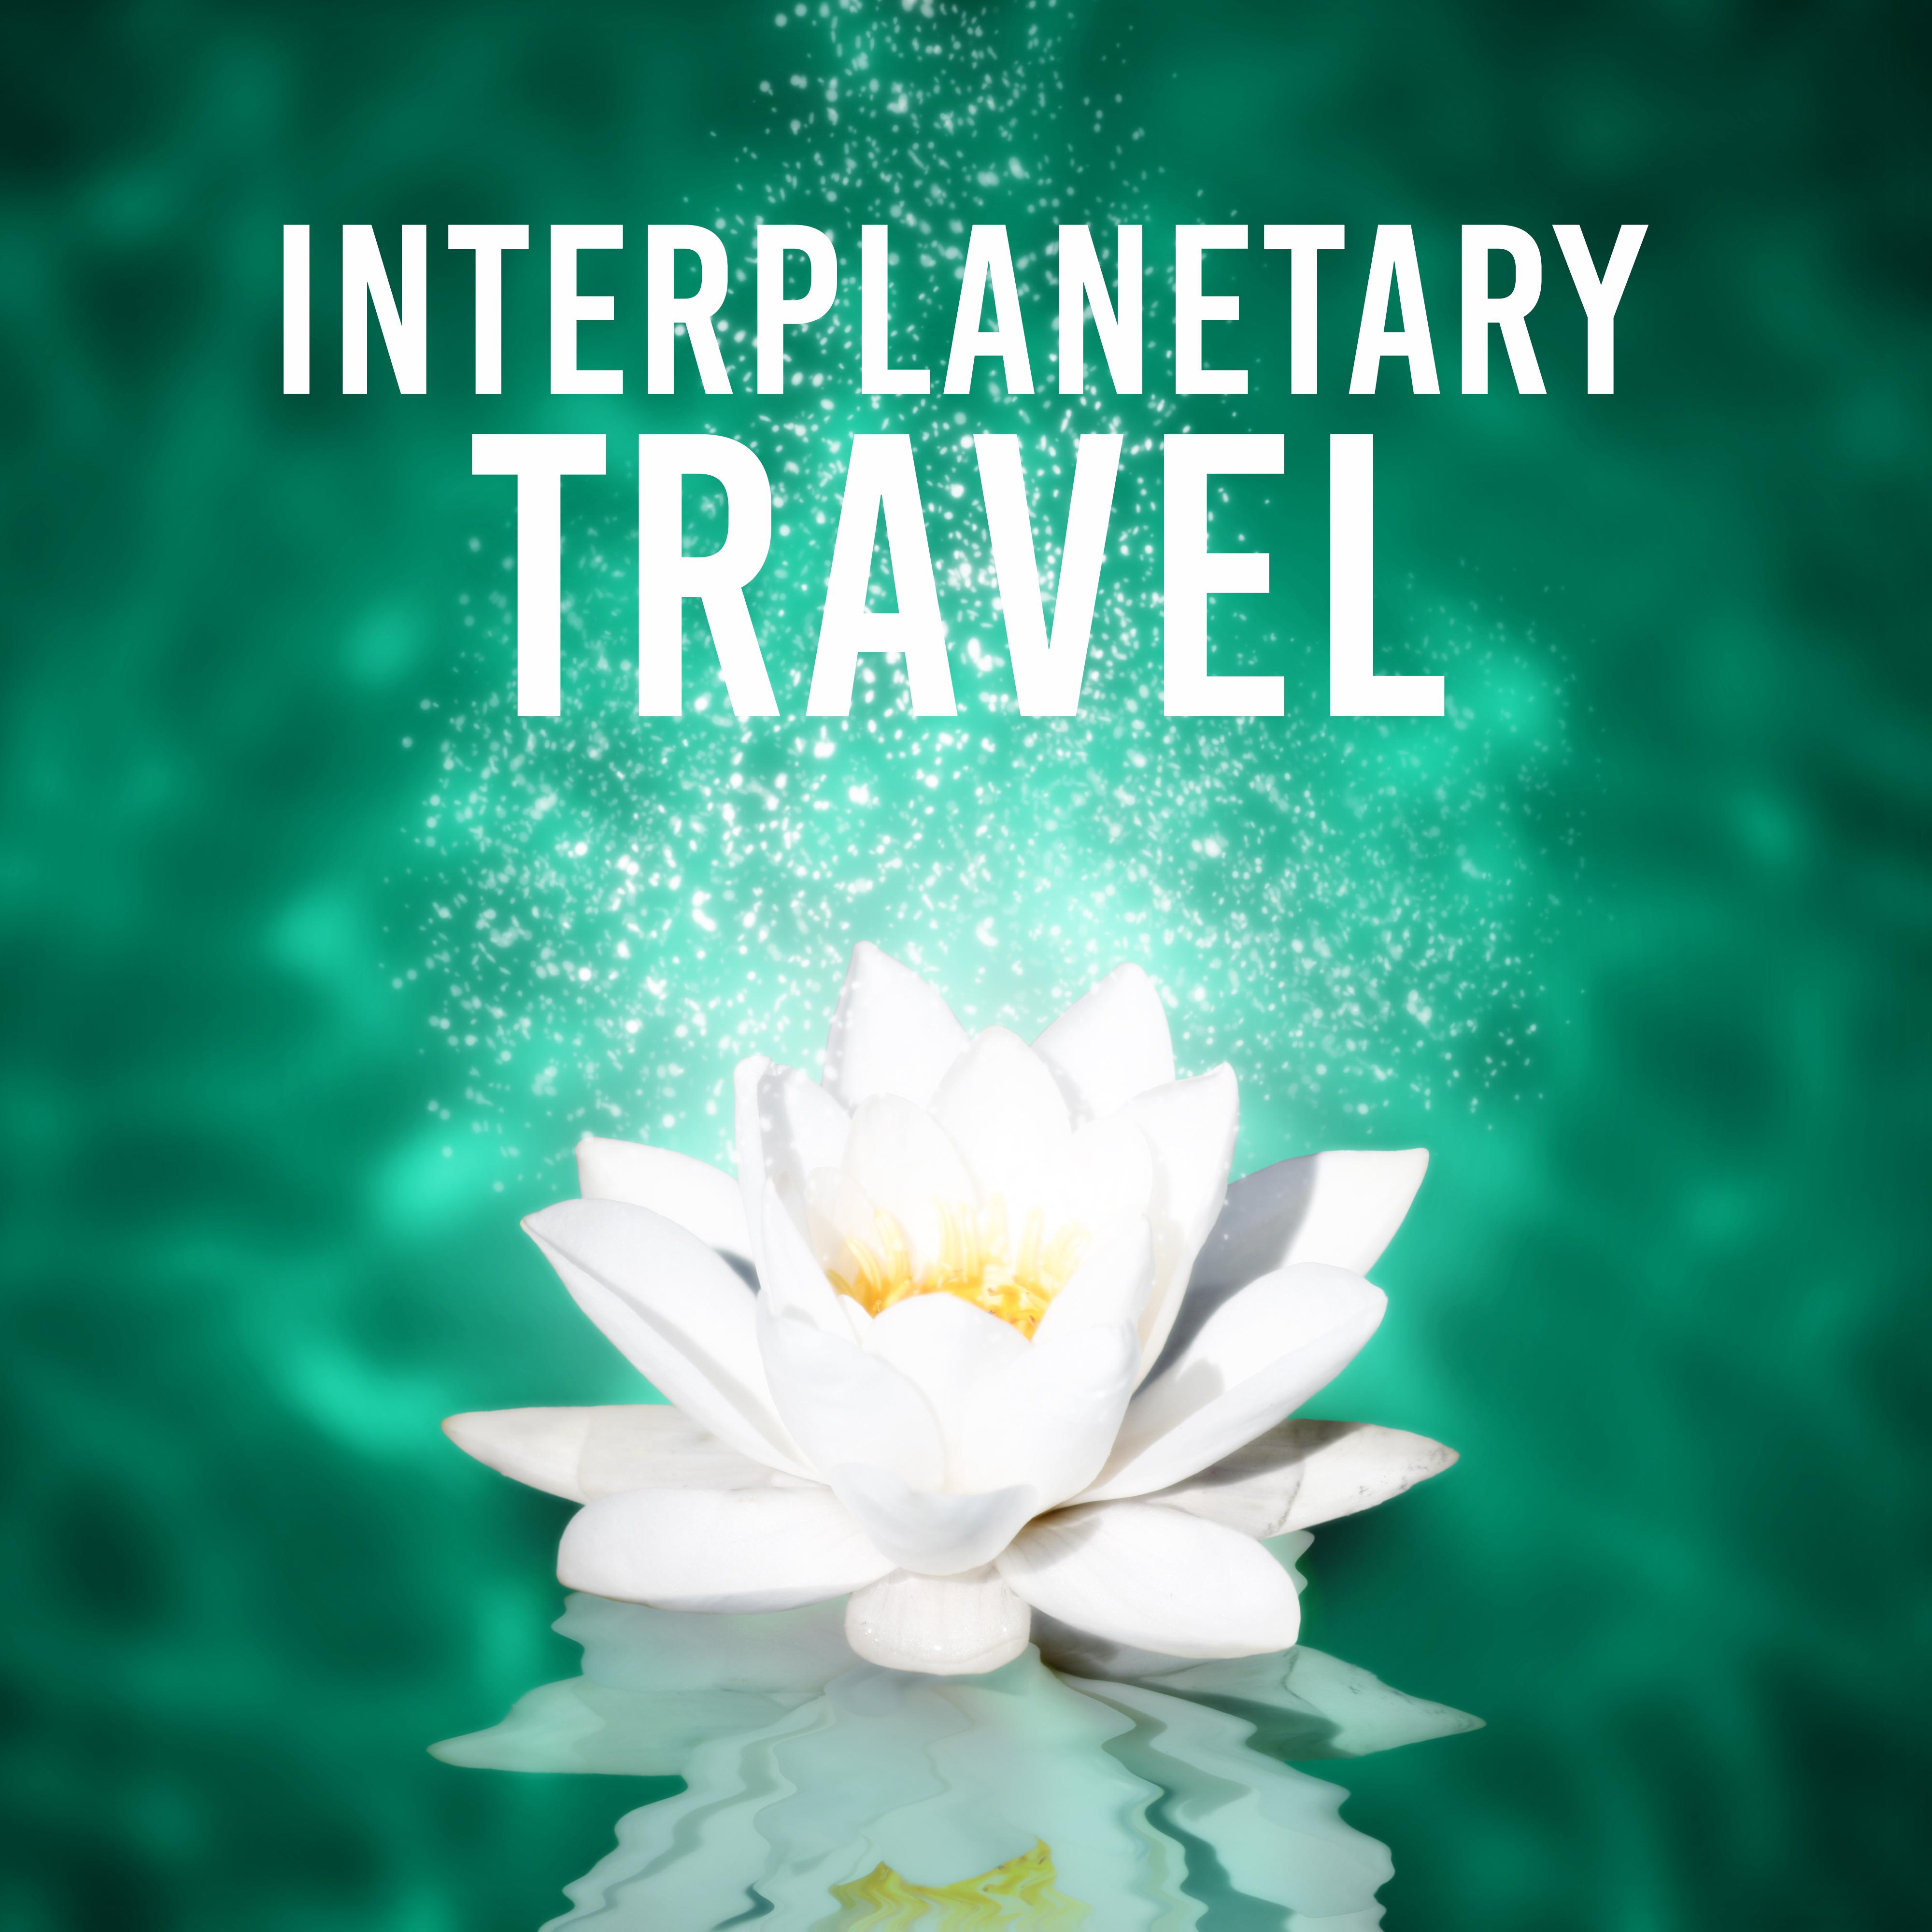 Interplanetary Travel – Whisk, Rest, Rise, Catch on, Get, Conformity, Harmony, Balance, Greenhouse, Greenery, Grass, Wind, Breeze